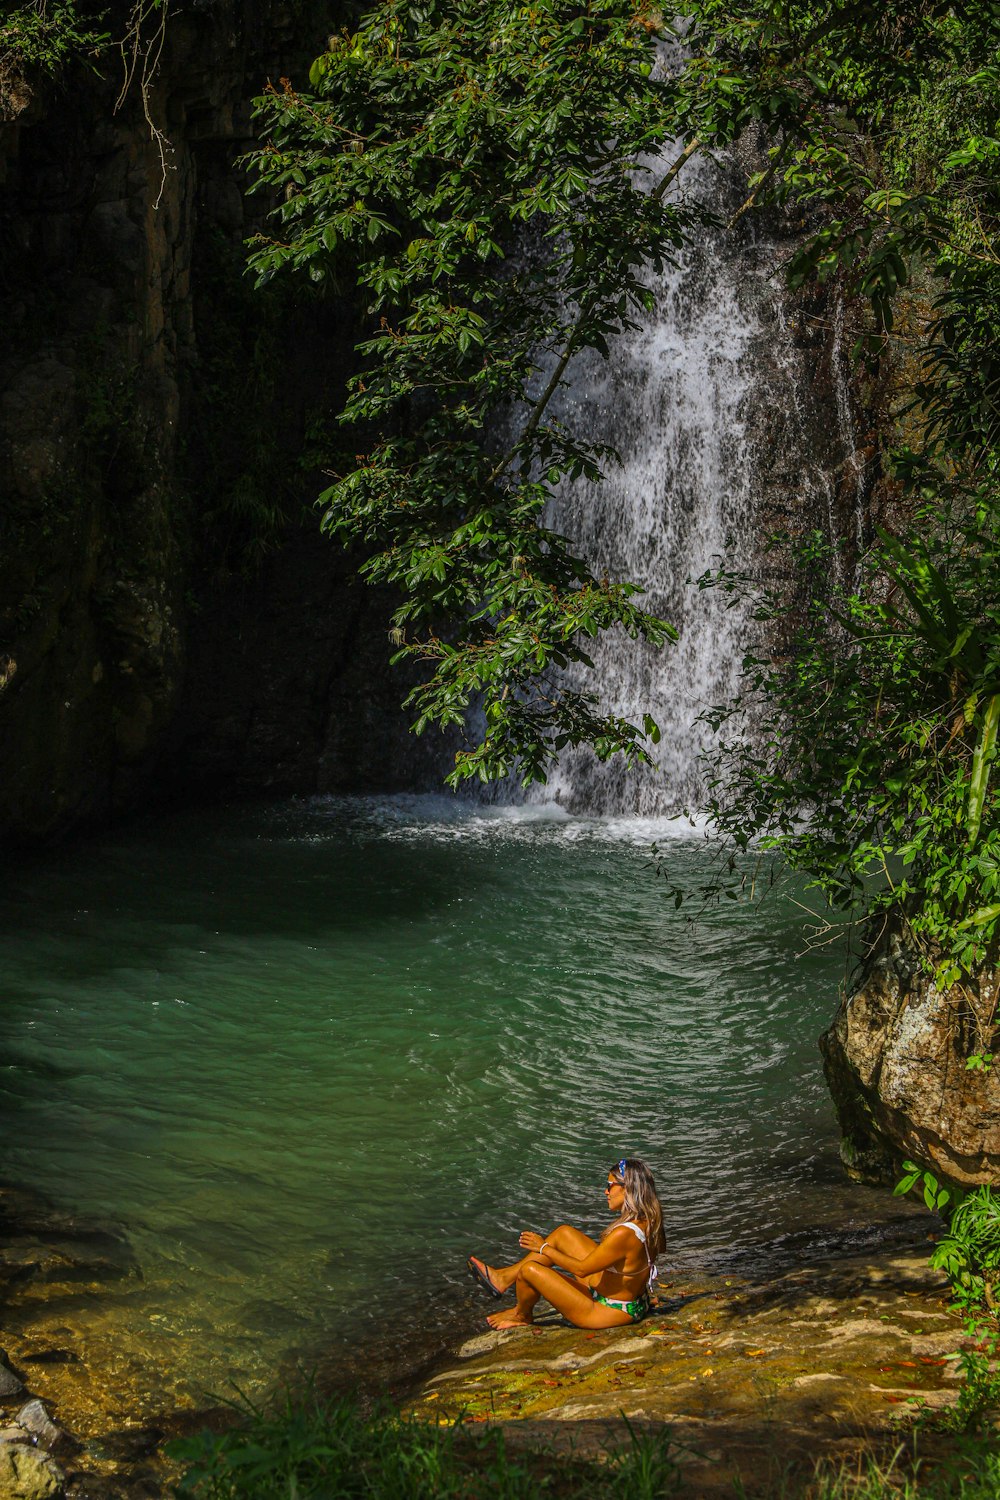 a woman sitting on a rock in front of a waterfall